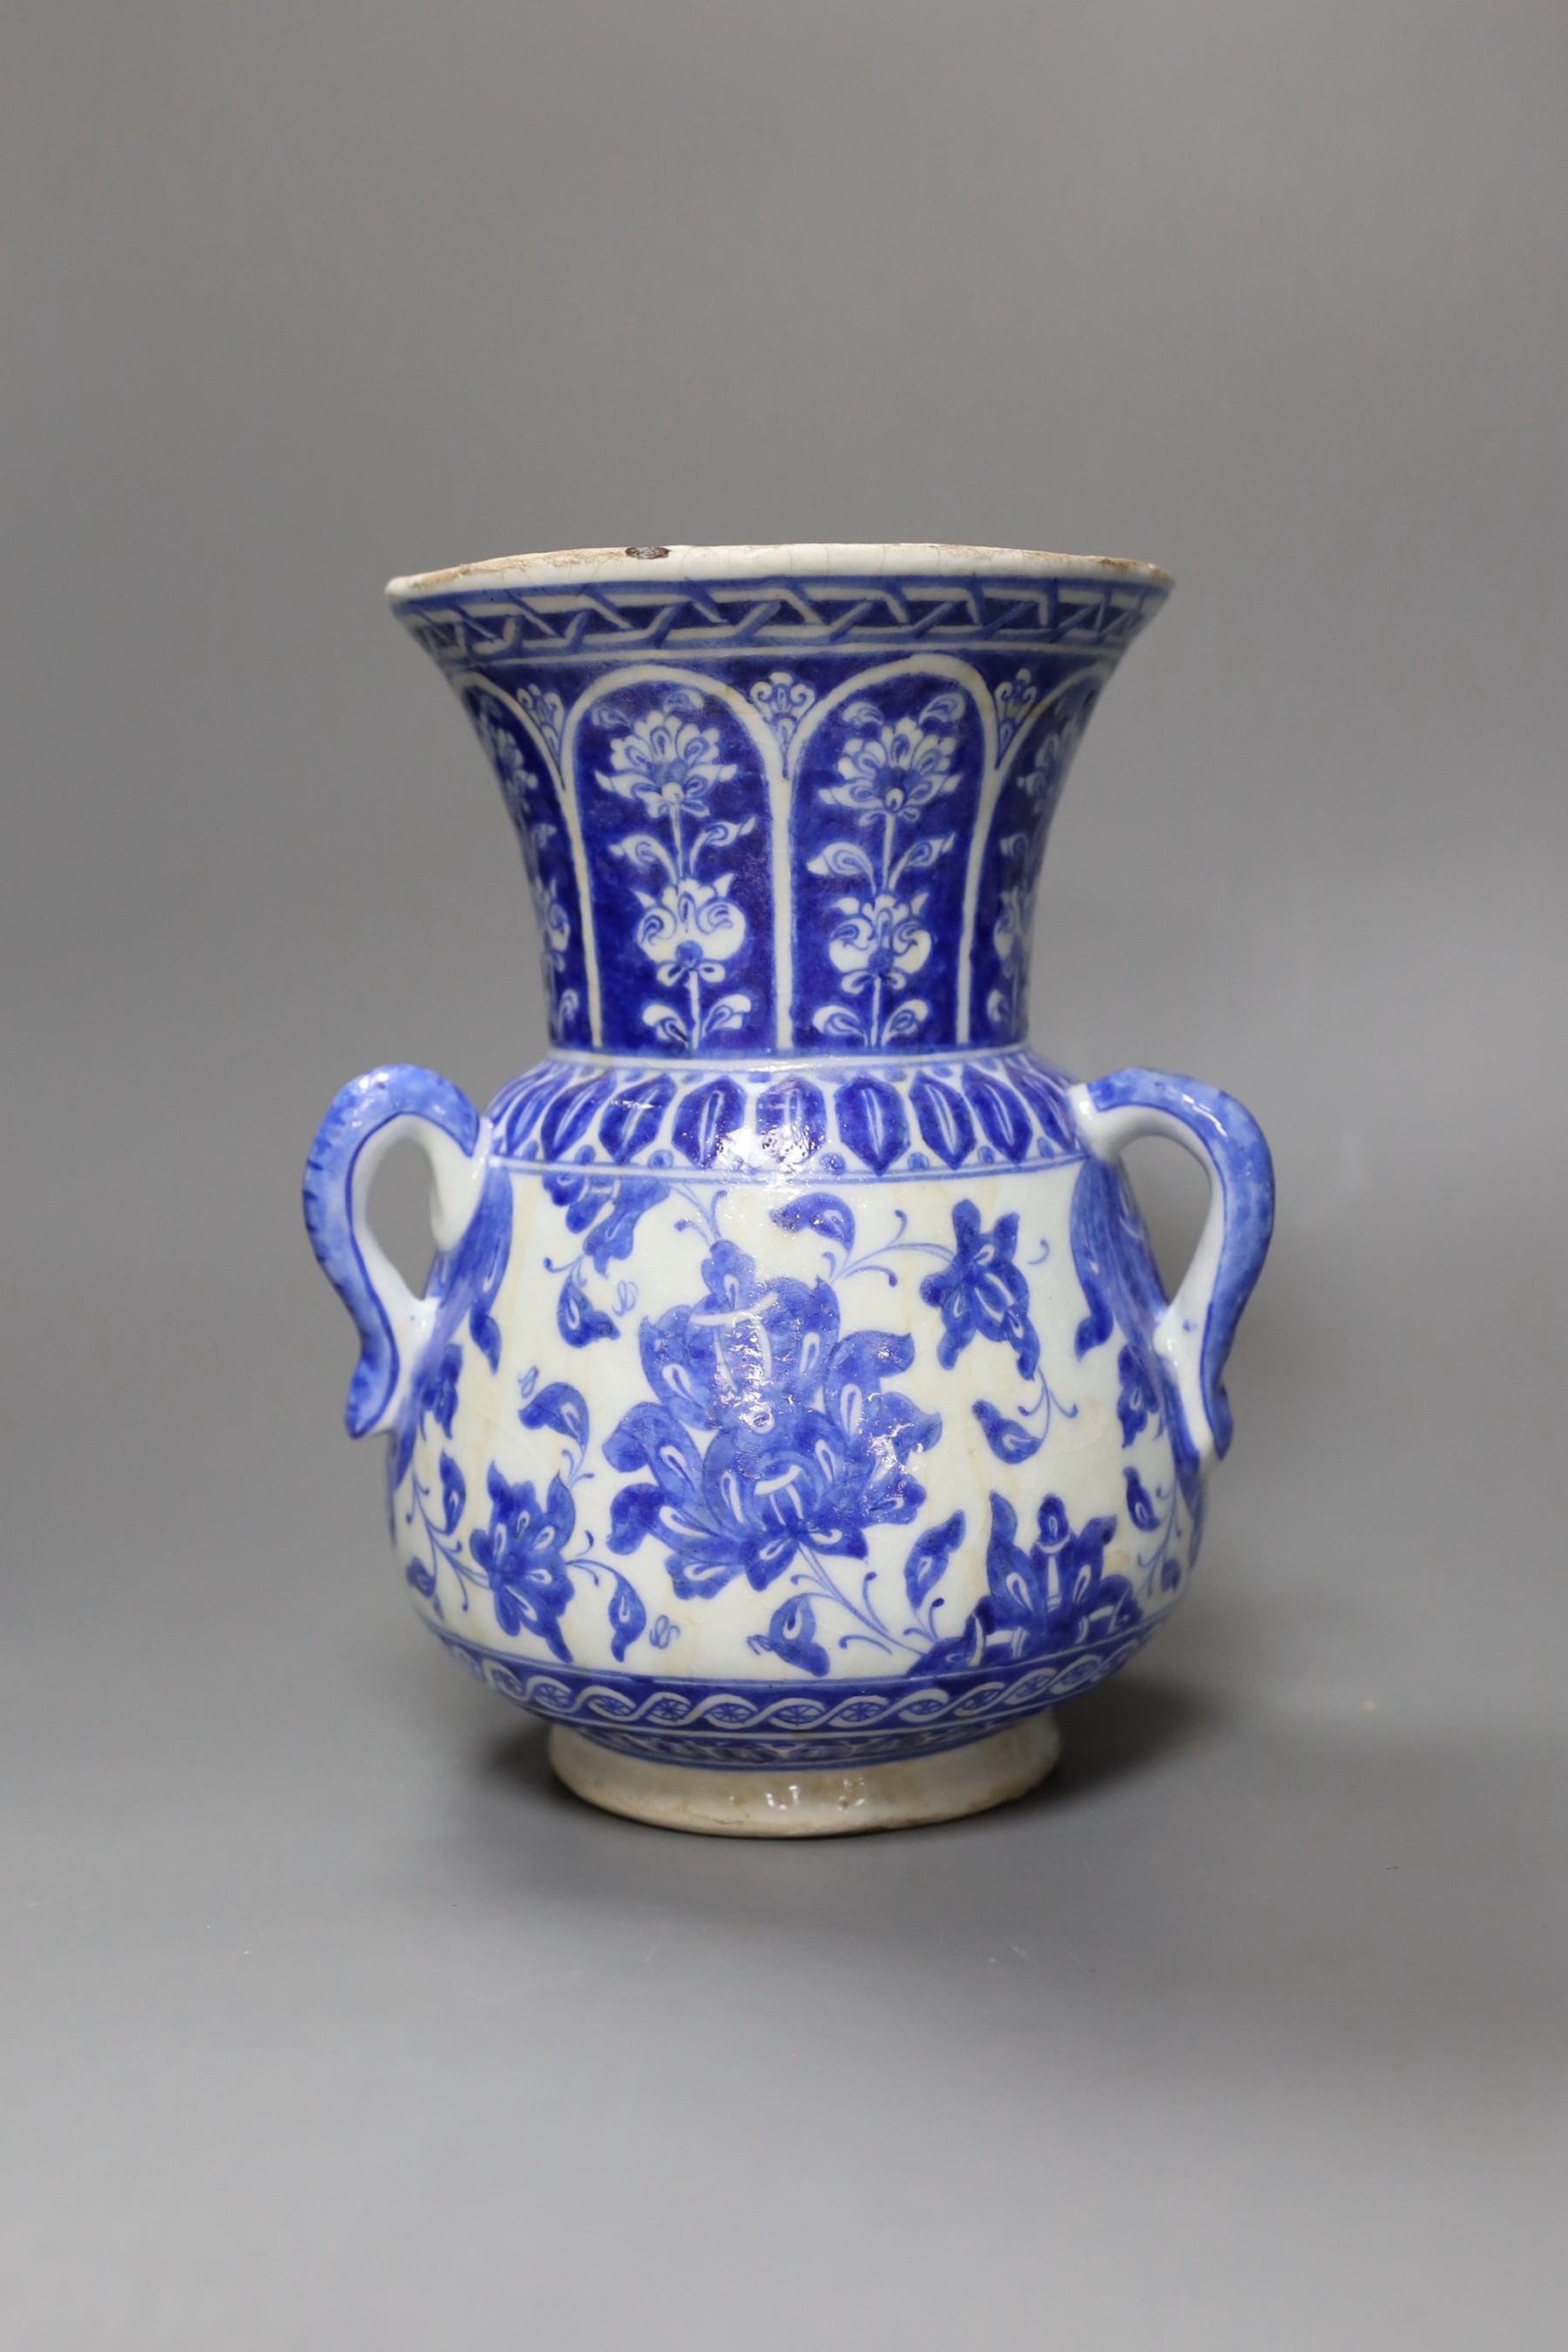 A three-handled blue and white Iznik pottery vase with floral motif, 22.5cm tall